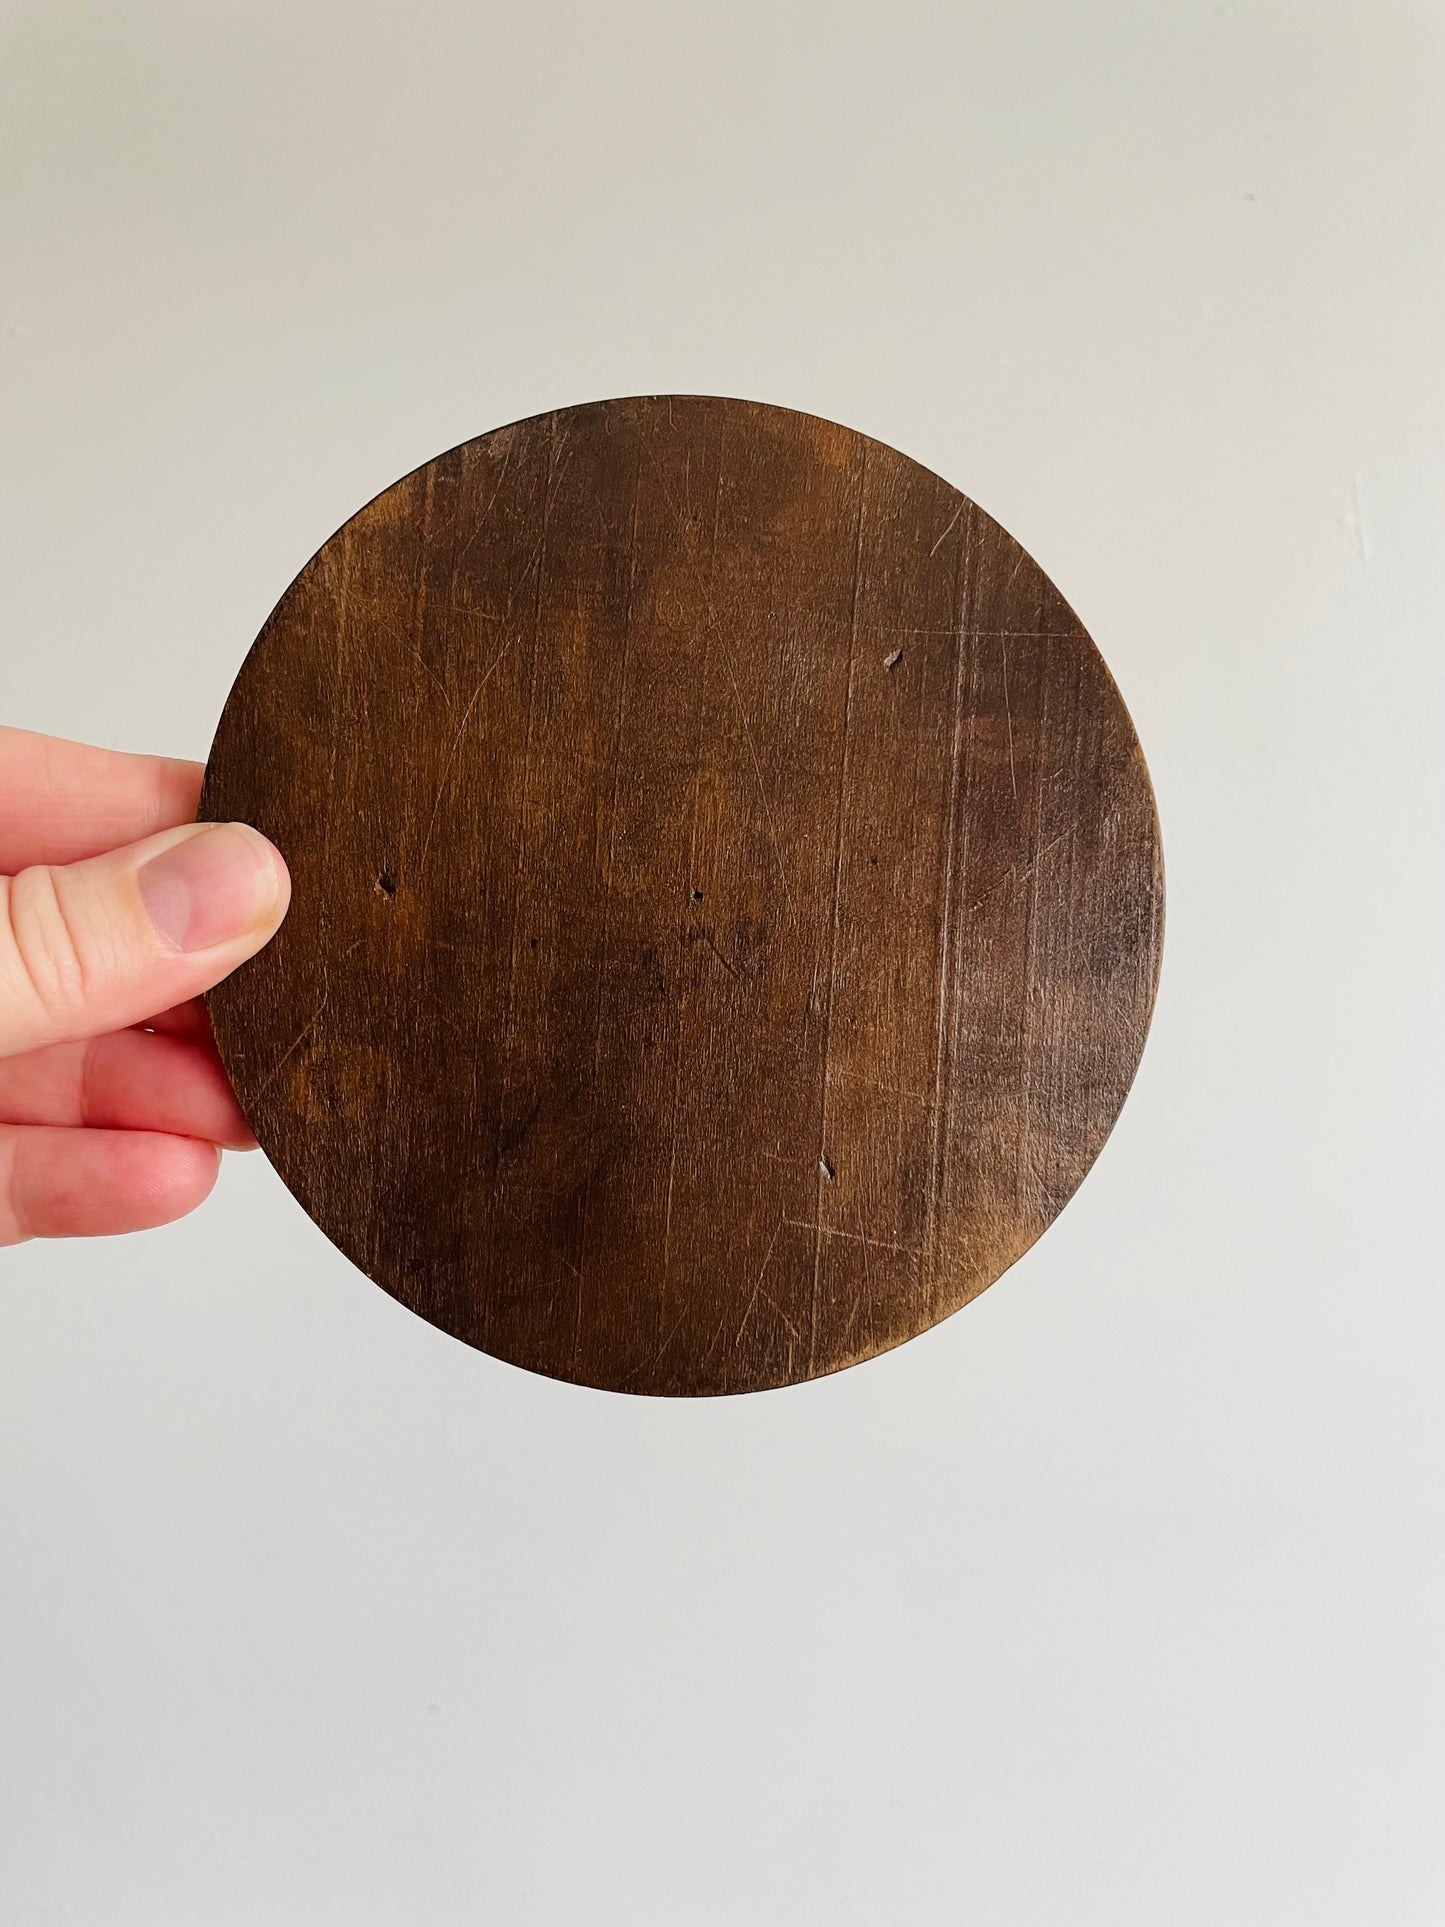 Miniature Wooden Plate with Intricately Carved Design